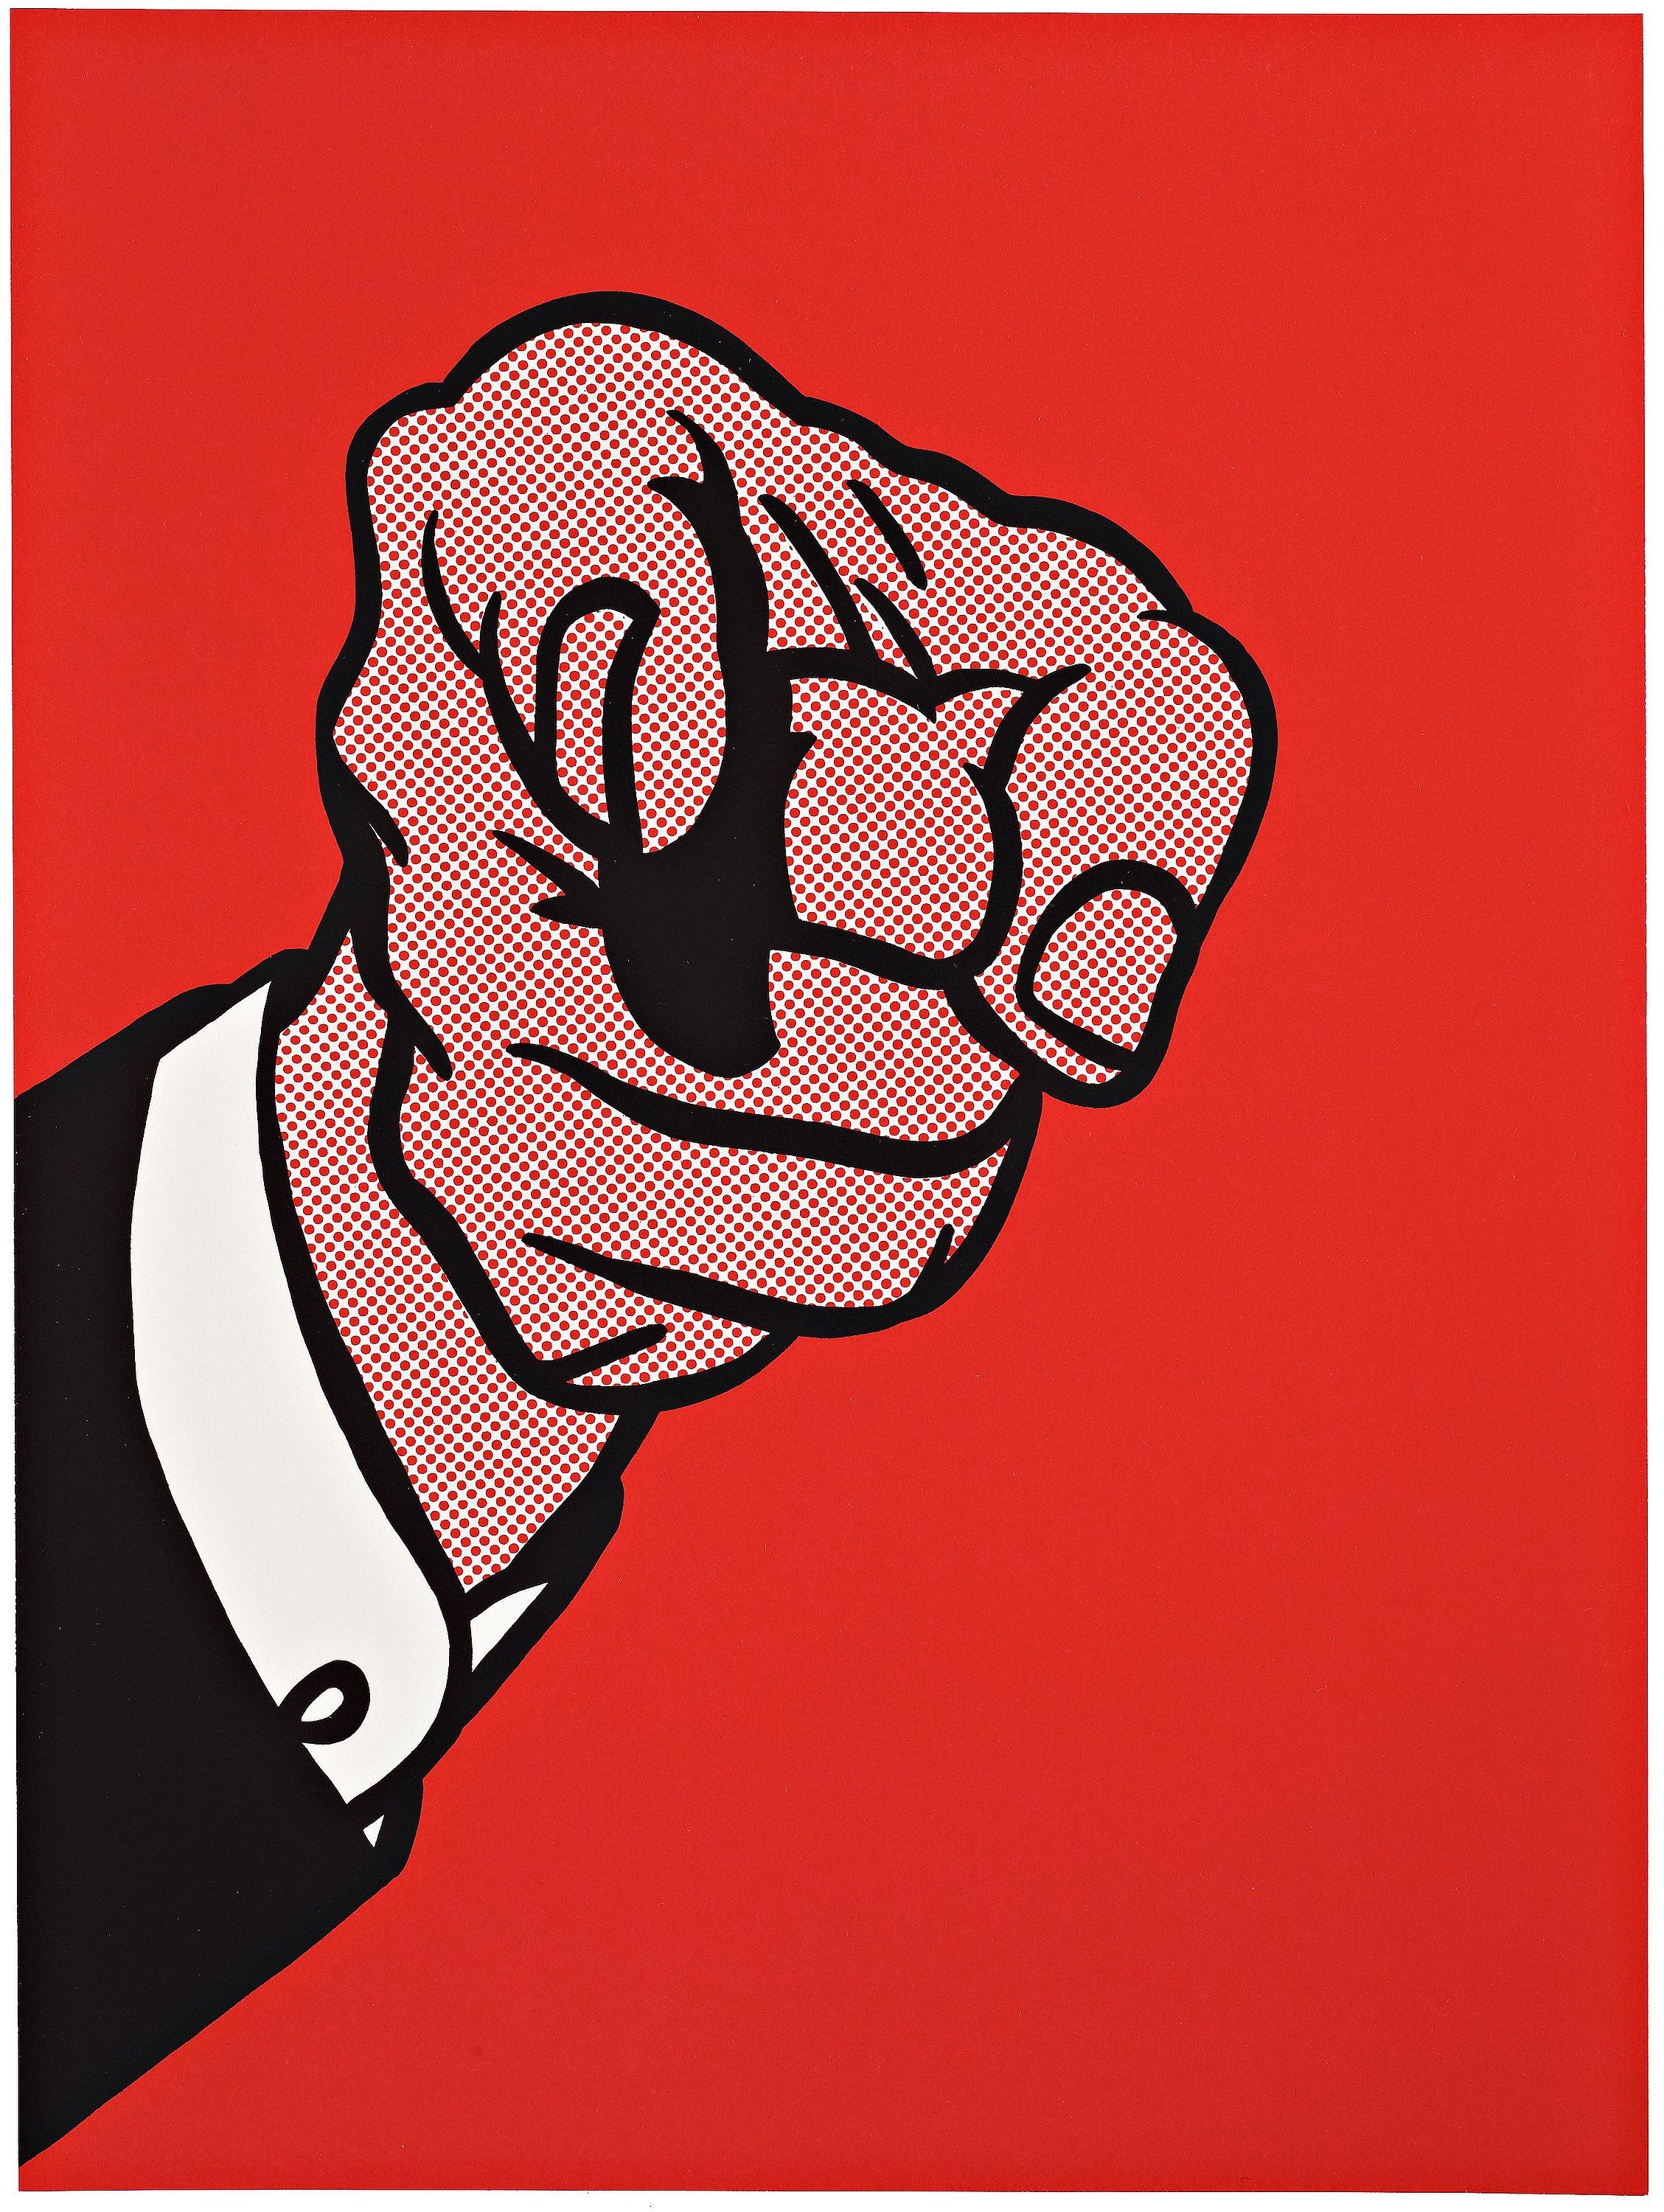 Roy Lichtenstein
Finger Pointing, 1973

Screenprint in colours, on wove
With the artist's copyright inkstamp verso
Numbered from the edition of 300
From The New York Collection for Stockholm
Published by Experiments in Art and Technology, Inc., New